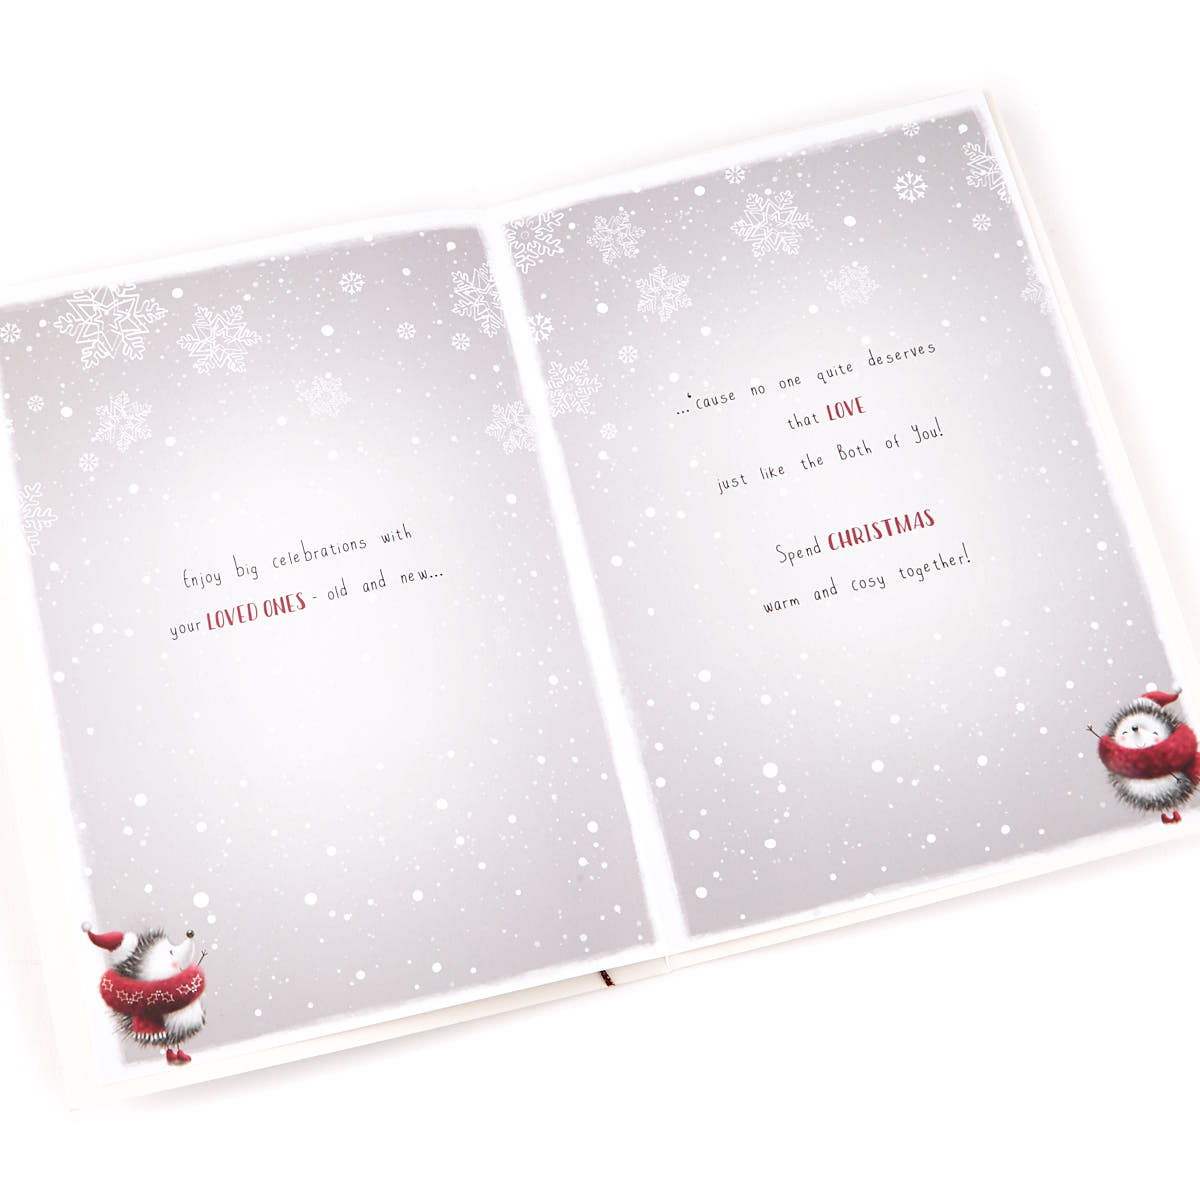 Signature Collection Christmas Card - Both Of You Hedgehogs